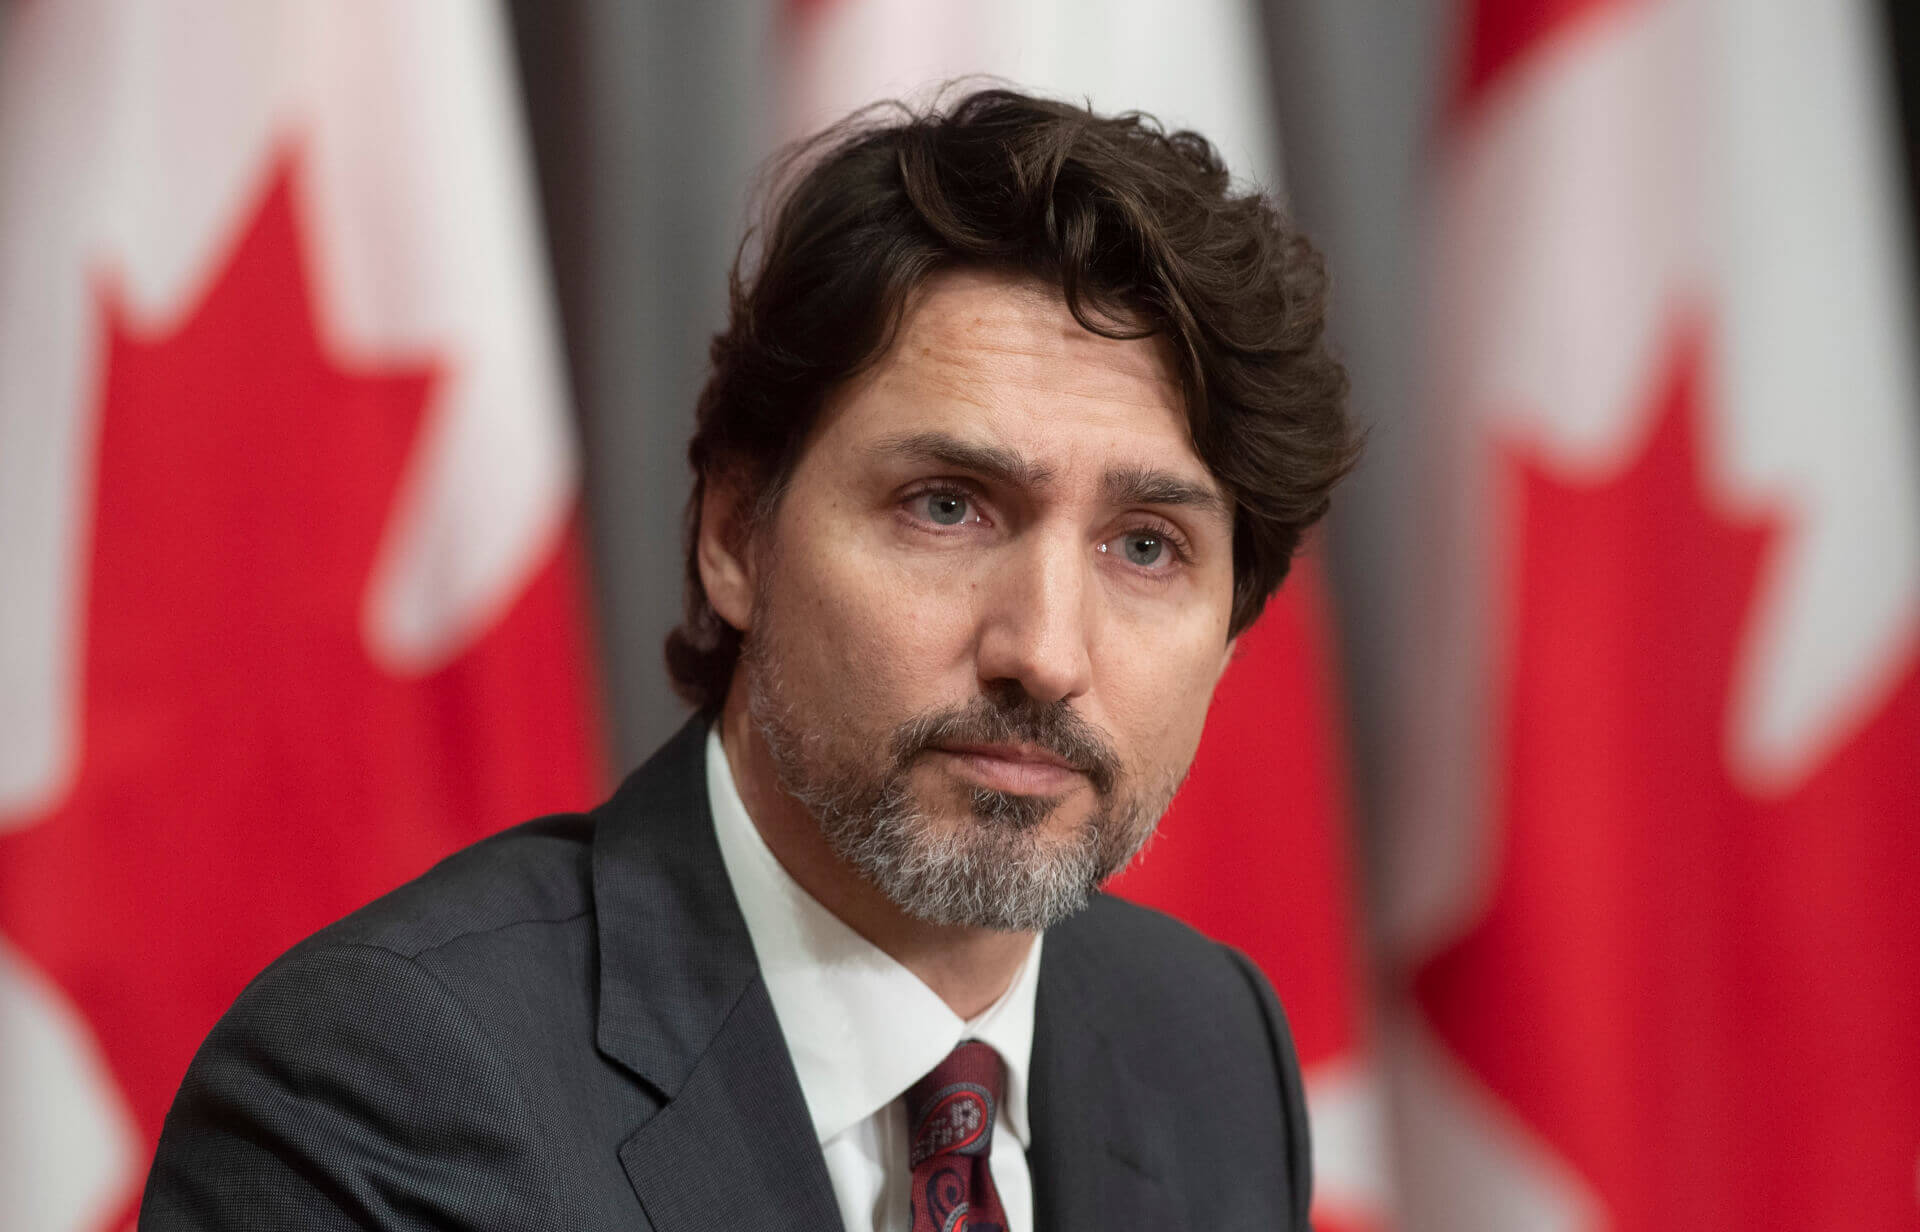 Trudeau Bans 1,500 Types of ‘Assault-Style’ Firearms